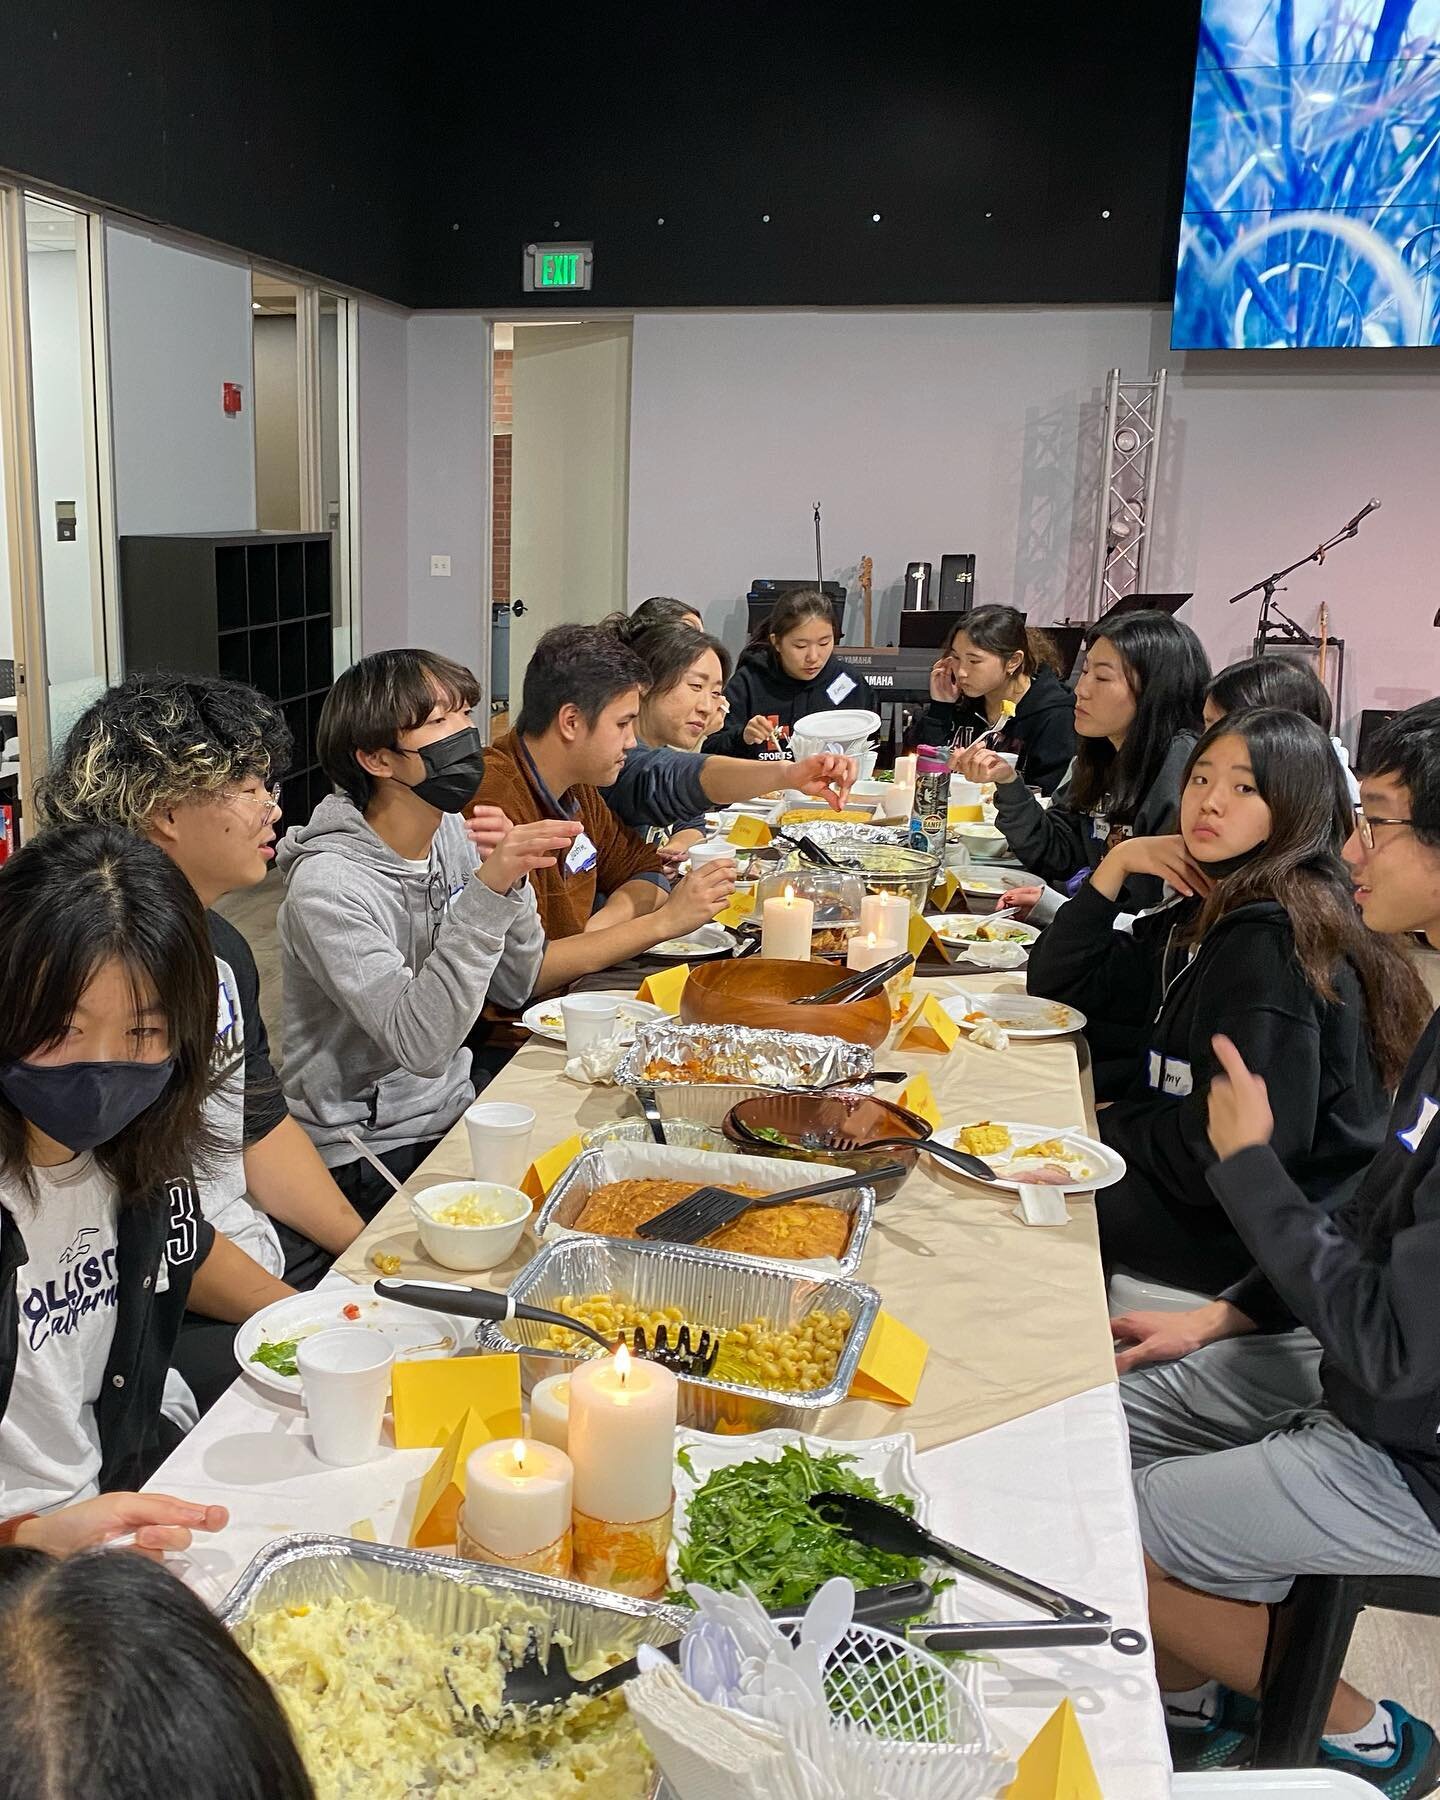 🦃🤤🙏🏼

Hope everybody had a great Thanksgiving! 
At Element we celebrated together with a MASSIVE banquet, a moment to give thanks, giving back to the community, and fresh homemade pumpkin waffles! 
Aaaand Jeopardy! 

So grateful for the happy mom